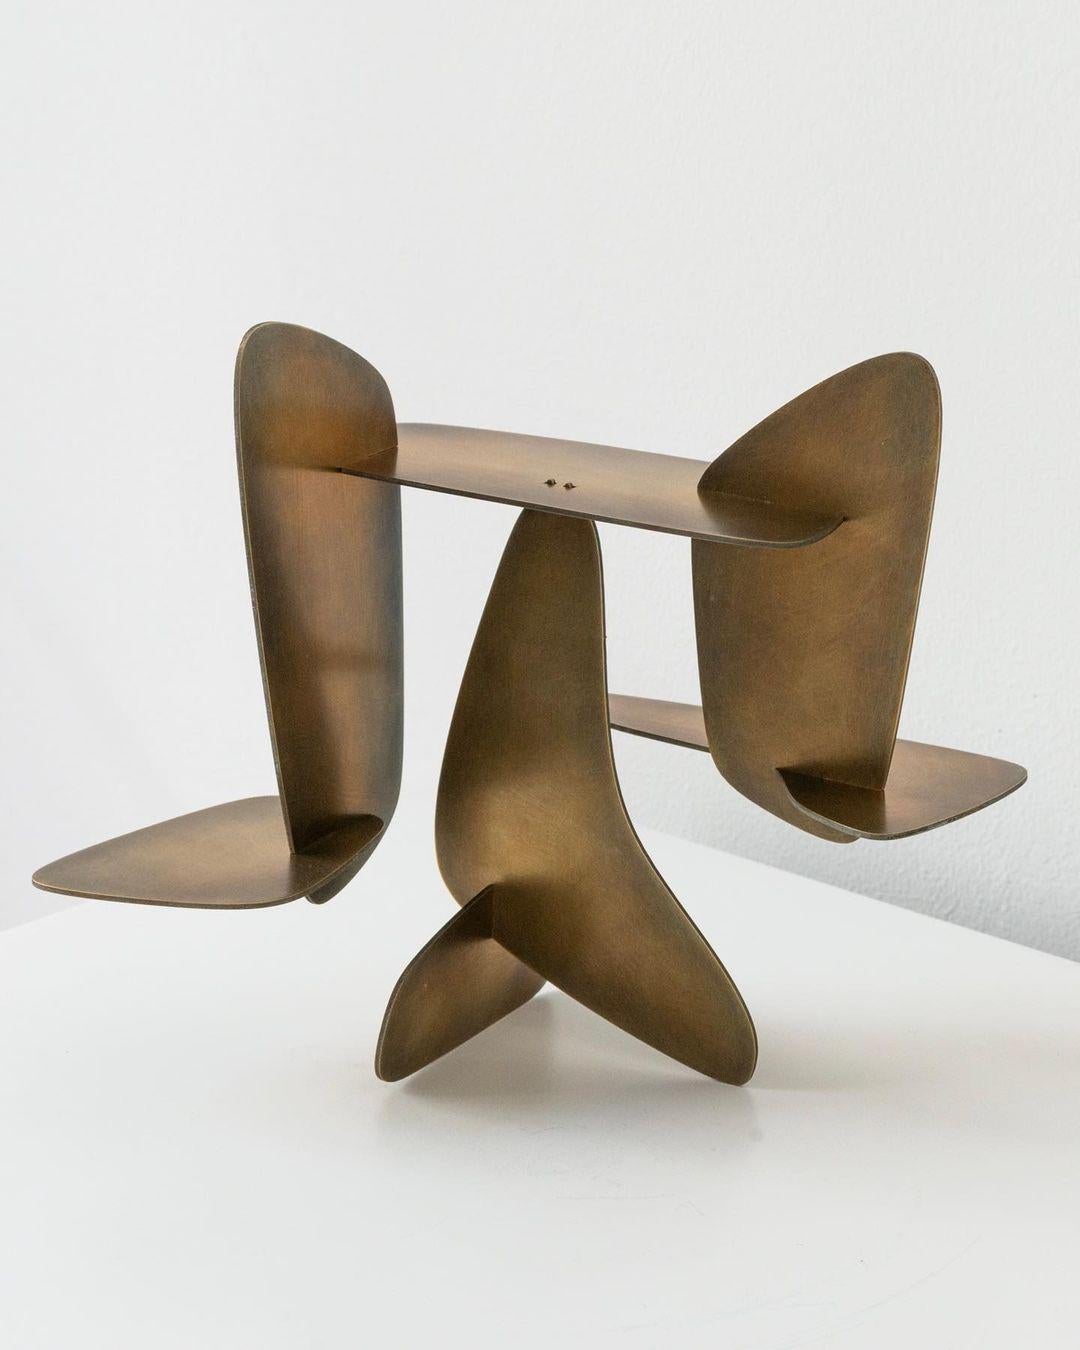 Artefacto 04 by Federico Stefanovich
Dimensions: D 15 x W 22 x H 19 cm.
Material: Brass.
Available in a larger size: D 25 x W 36 x H 32 cm.

Federico Stefanovich presents himself as a designer of furniture, accessories and lighting, who responds to